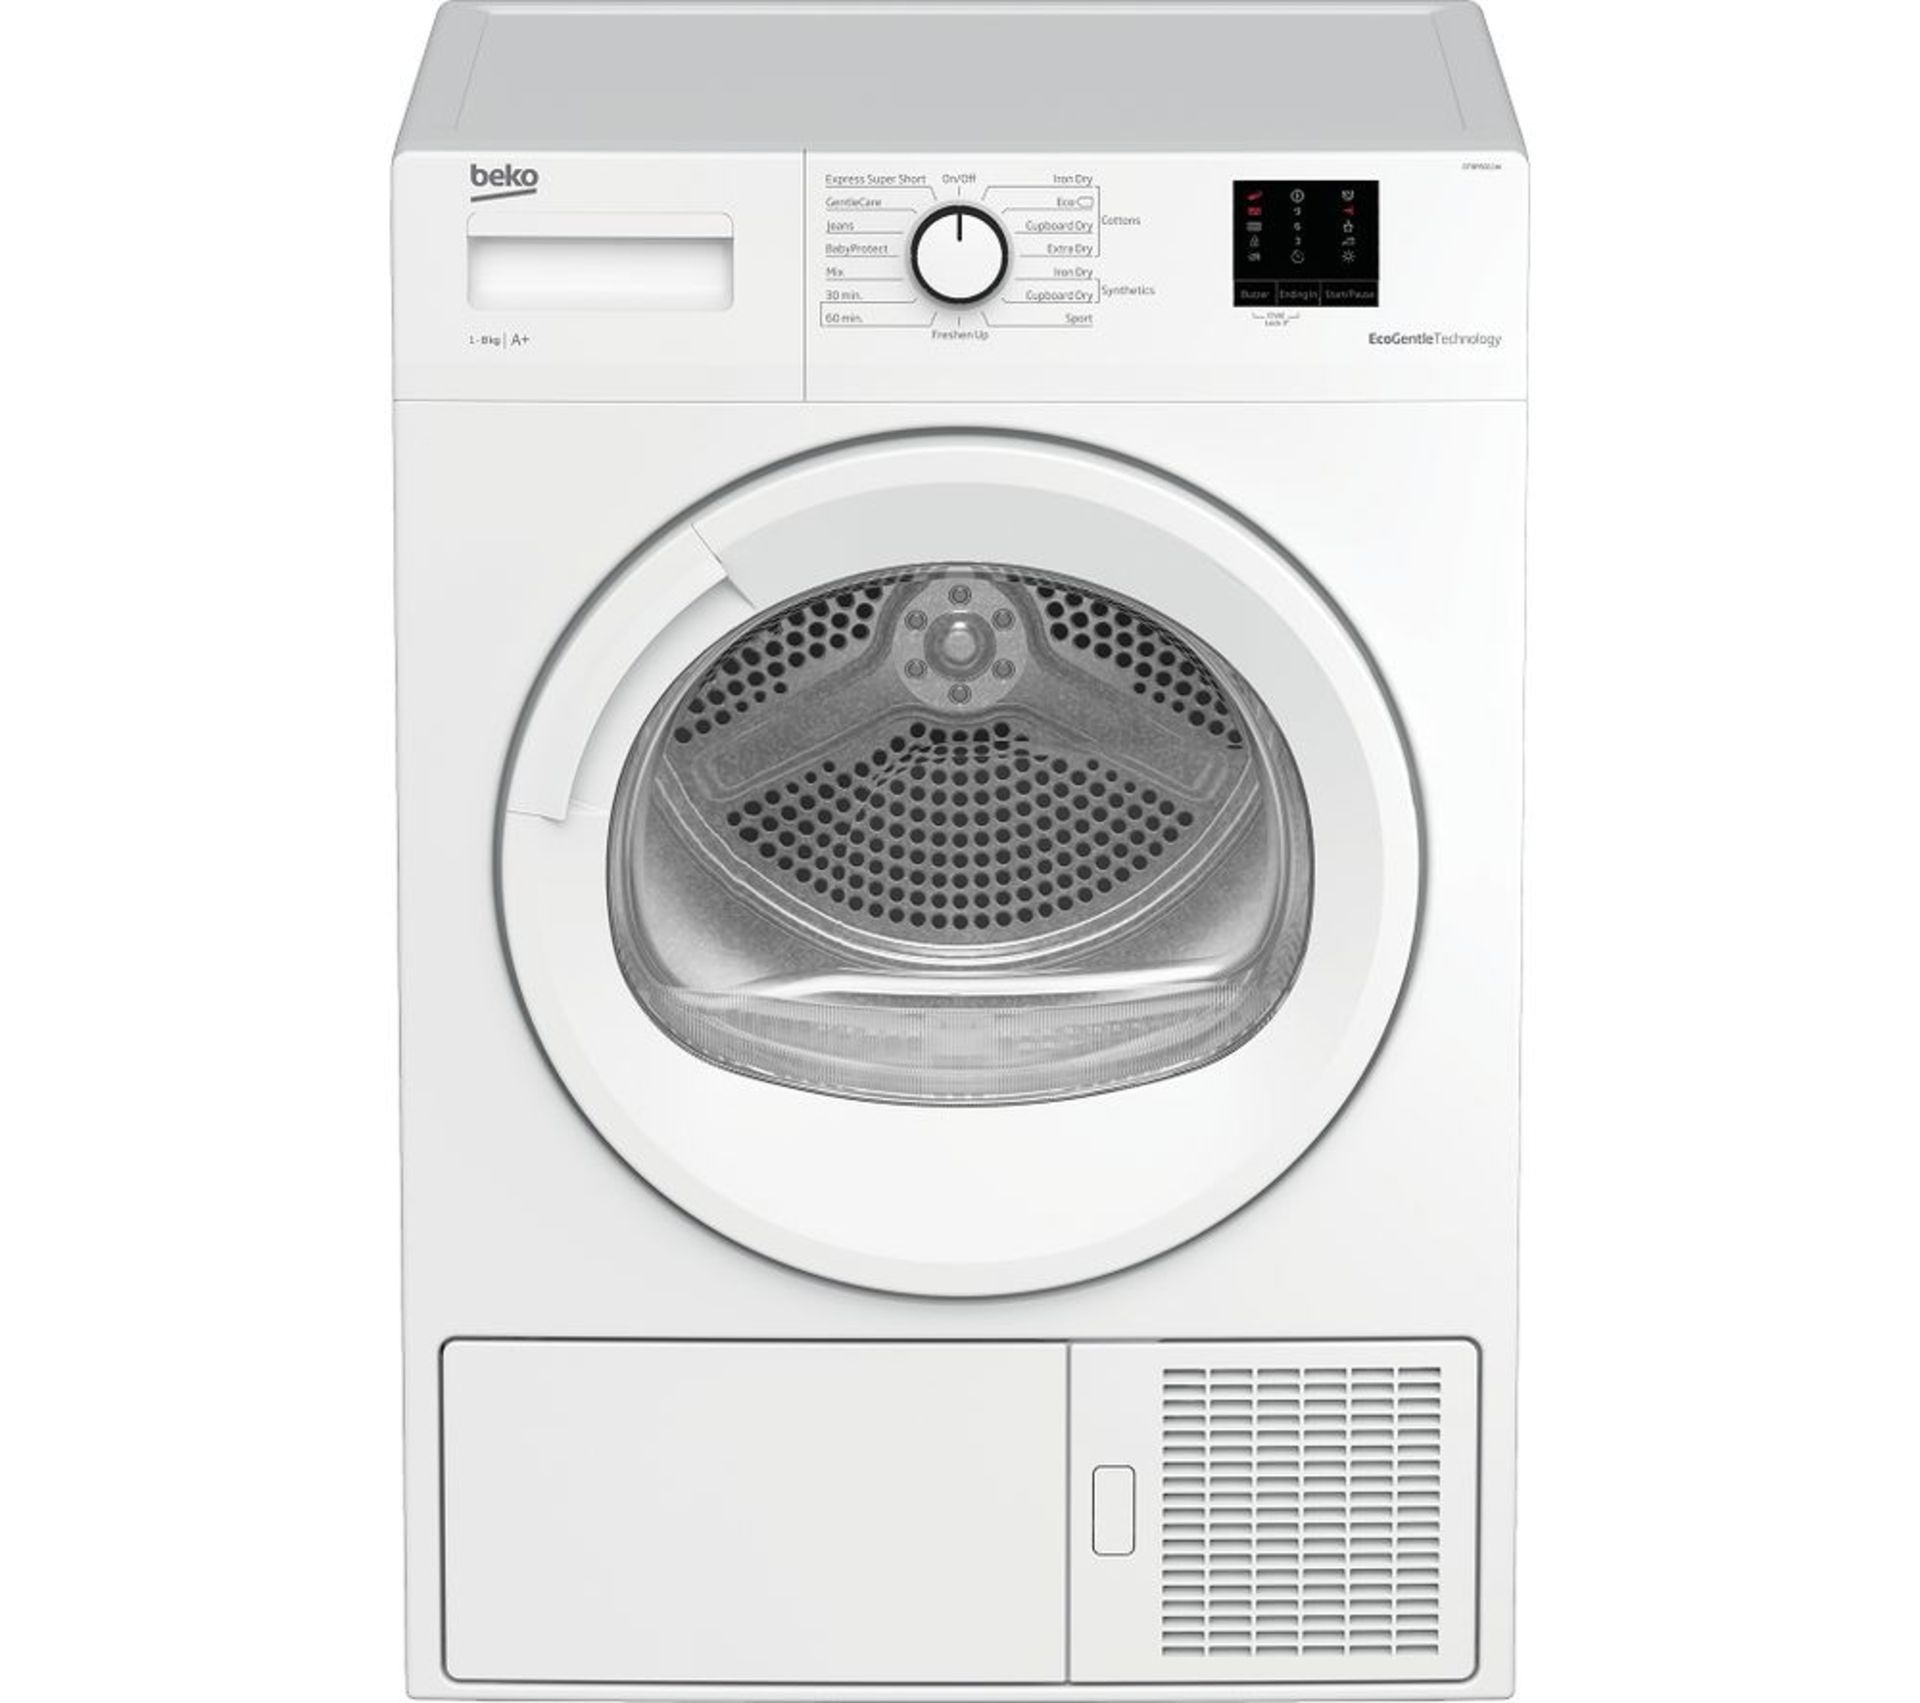 Pallet of Mixed White Goods. Brands include BEKO & HOOVER. Latest selling price £1229.97 - Image 3 of 4